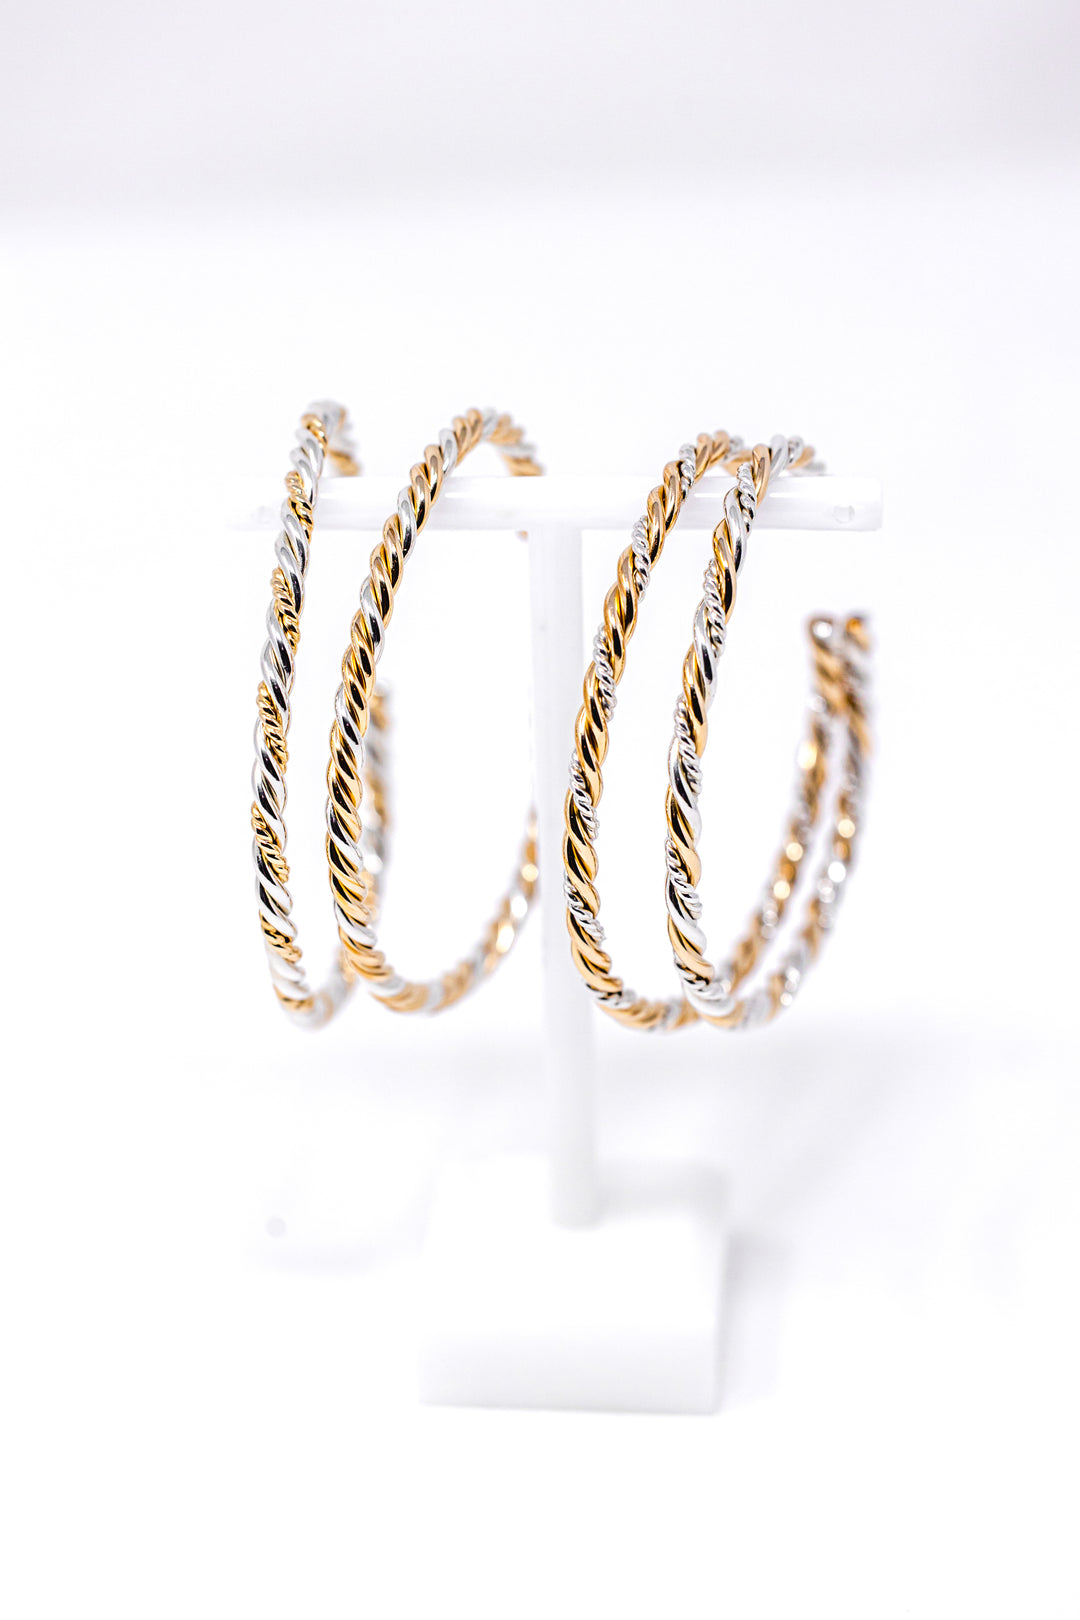 Woven Gold and Silver Bangle Cuff Bracelet